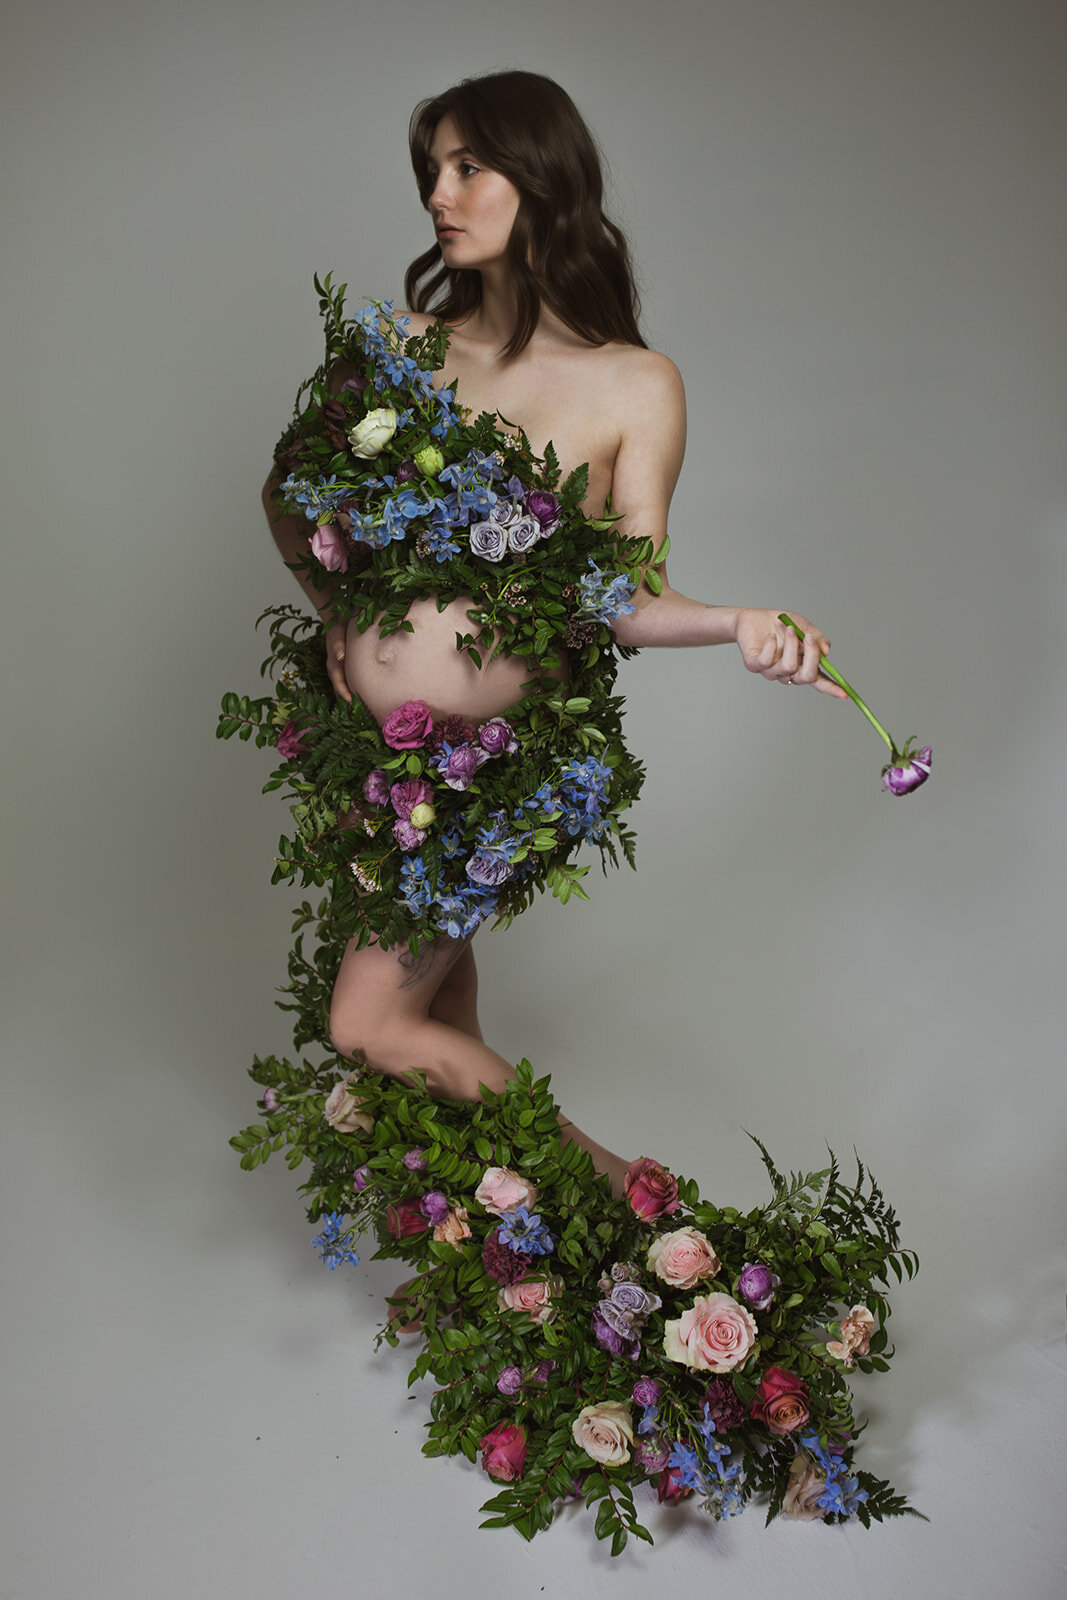 Greek inspired maternity shoot with a wearable floral garland filled with blue delphinium, lavender spray roses, plum ranunculus, blush and fuchsia roses. Designed by wedding florist Rosemary & Finch in Nashville.